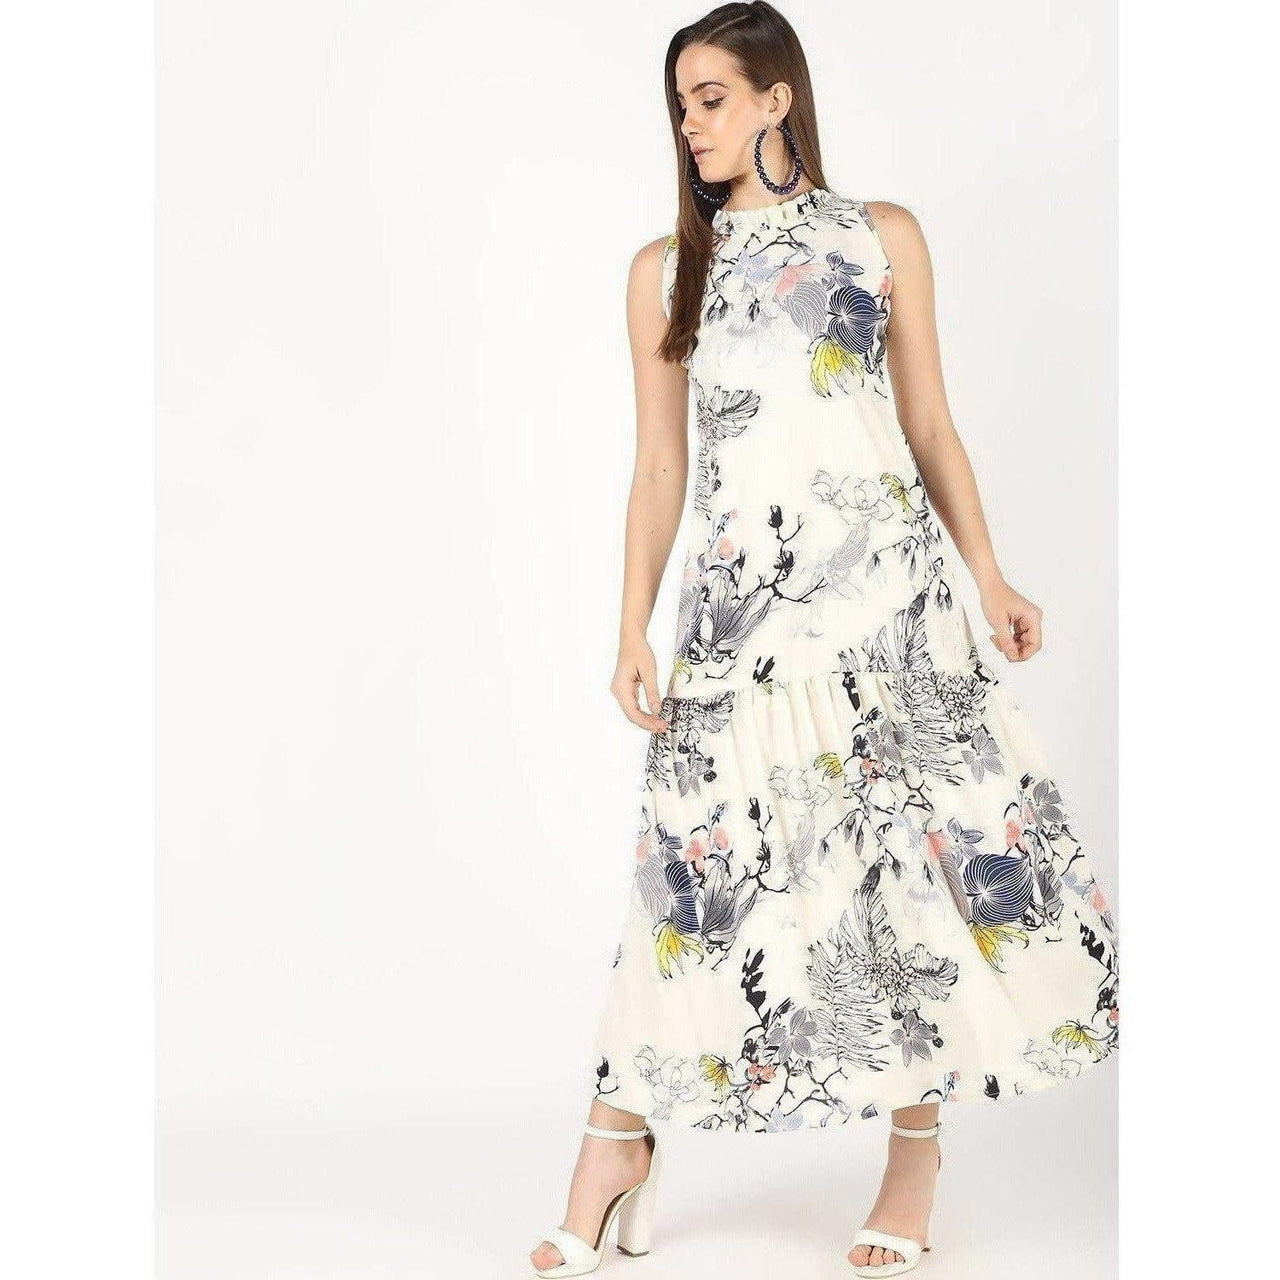 Cheera Flowral Printed Long A-Line Party Dress